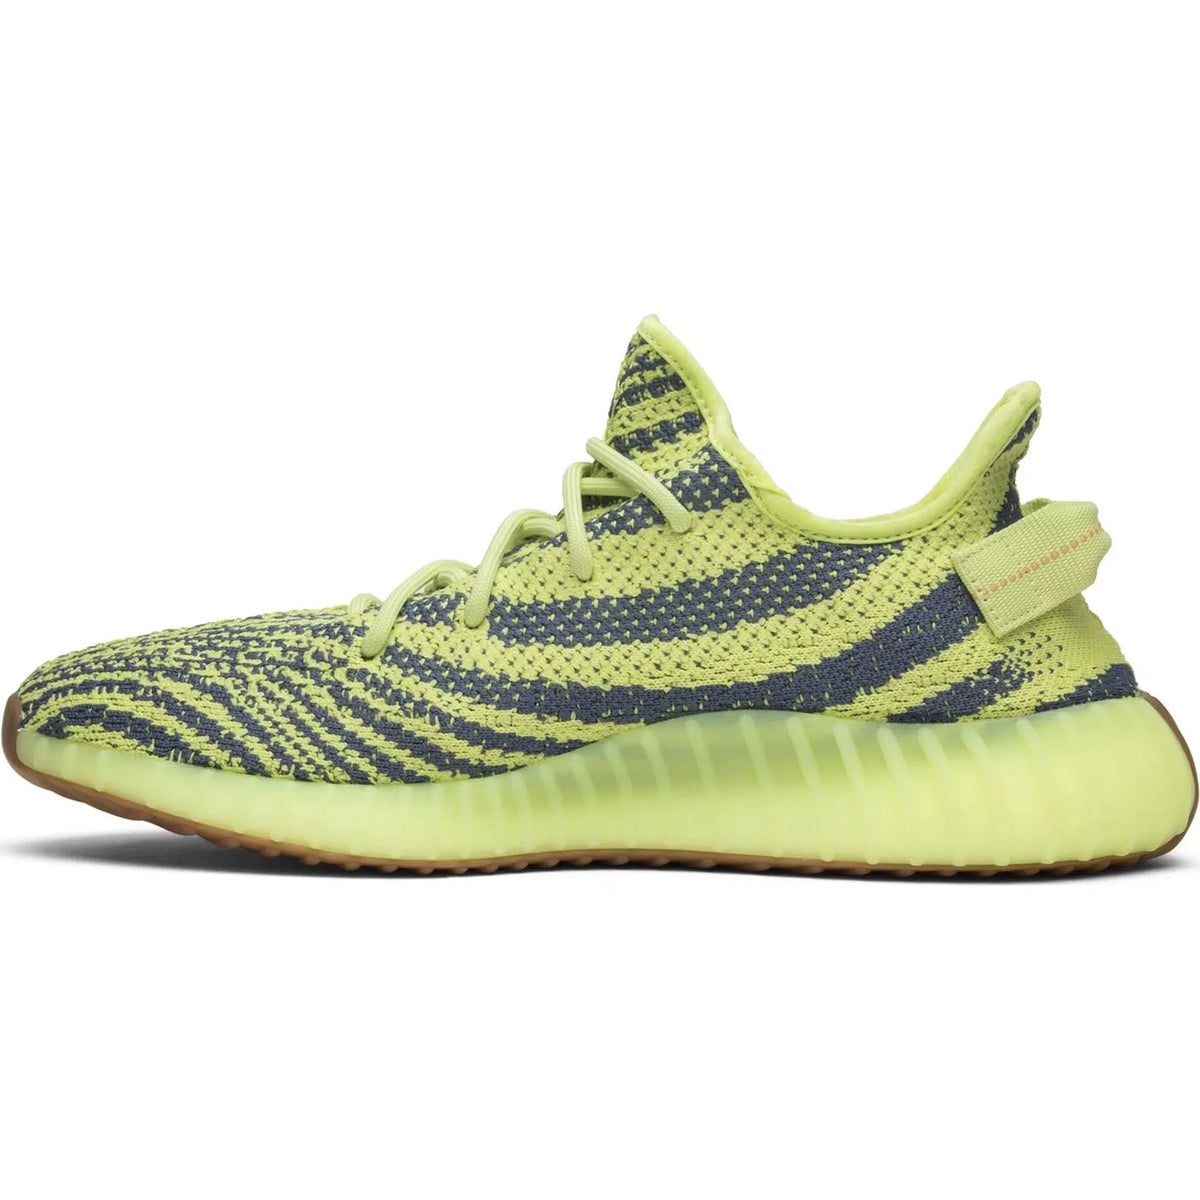 Adidas Yeezy Boost 350 V2 &#39;Semi Frozen Yellow&#39; | Waves Never Die | Adidas | Sneakers